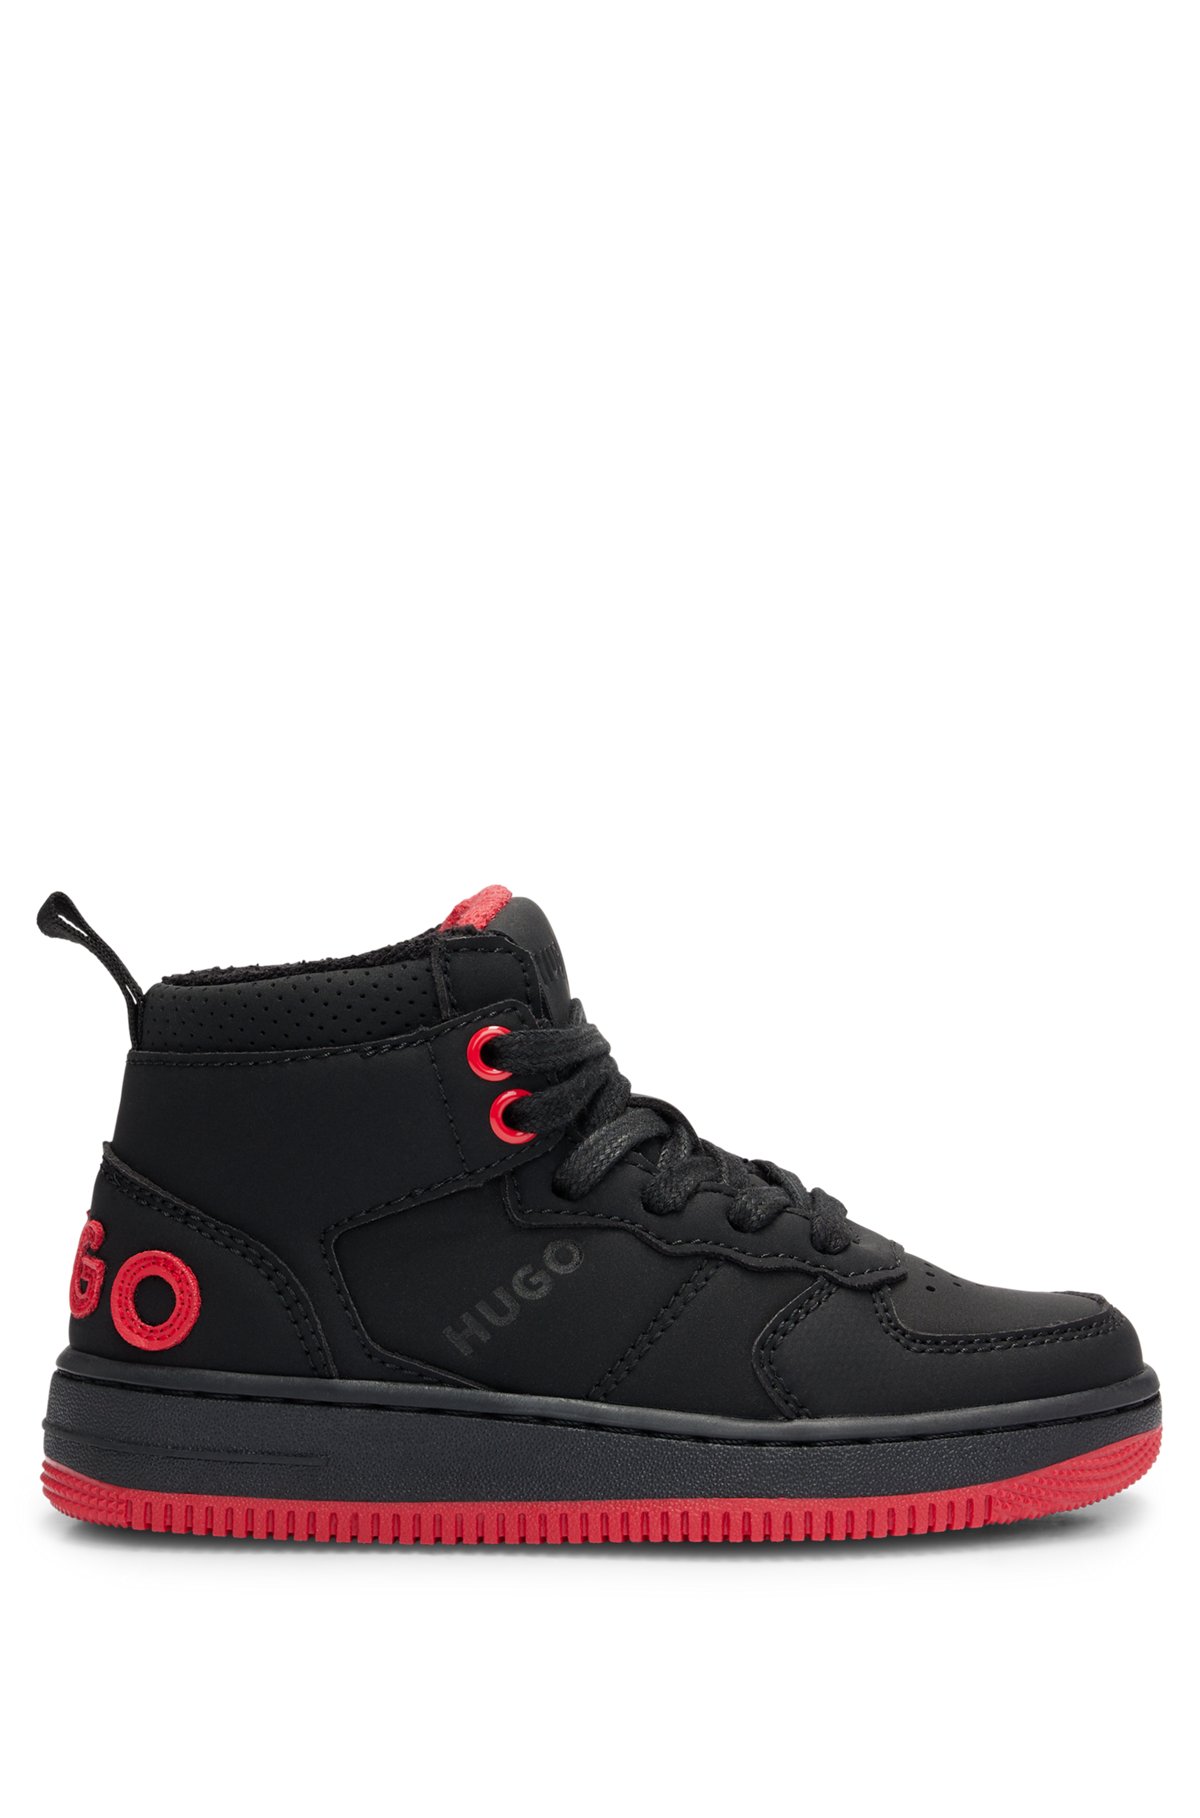 Kids' high-top trainers in faux nubuck leather, Black